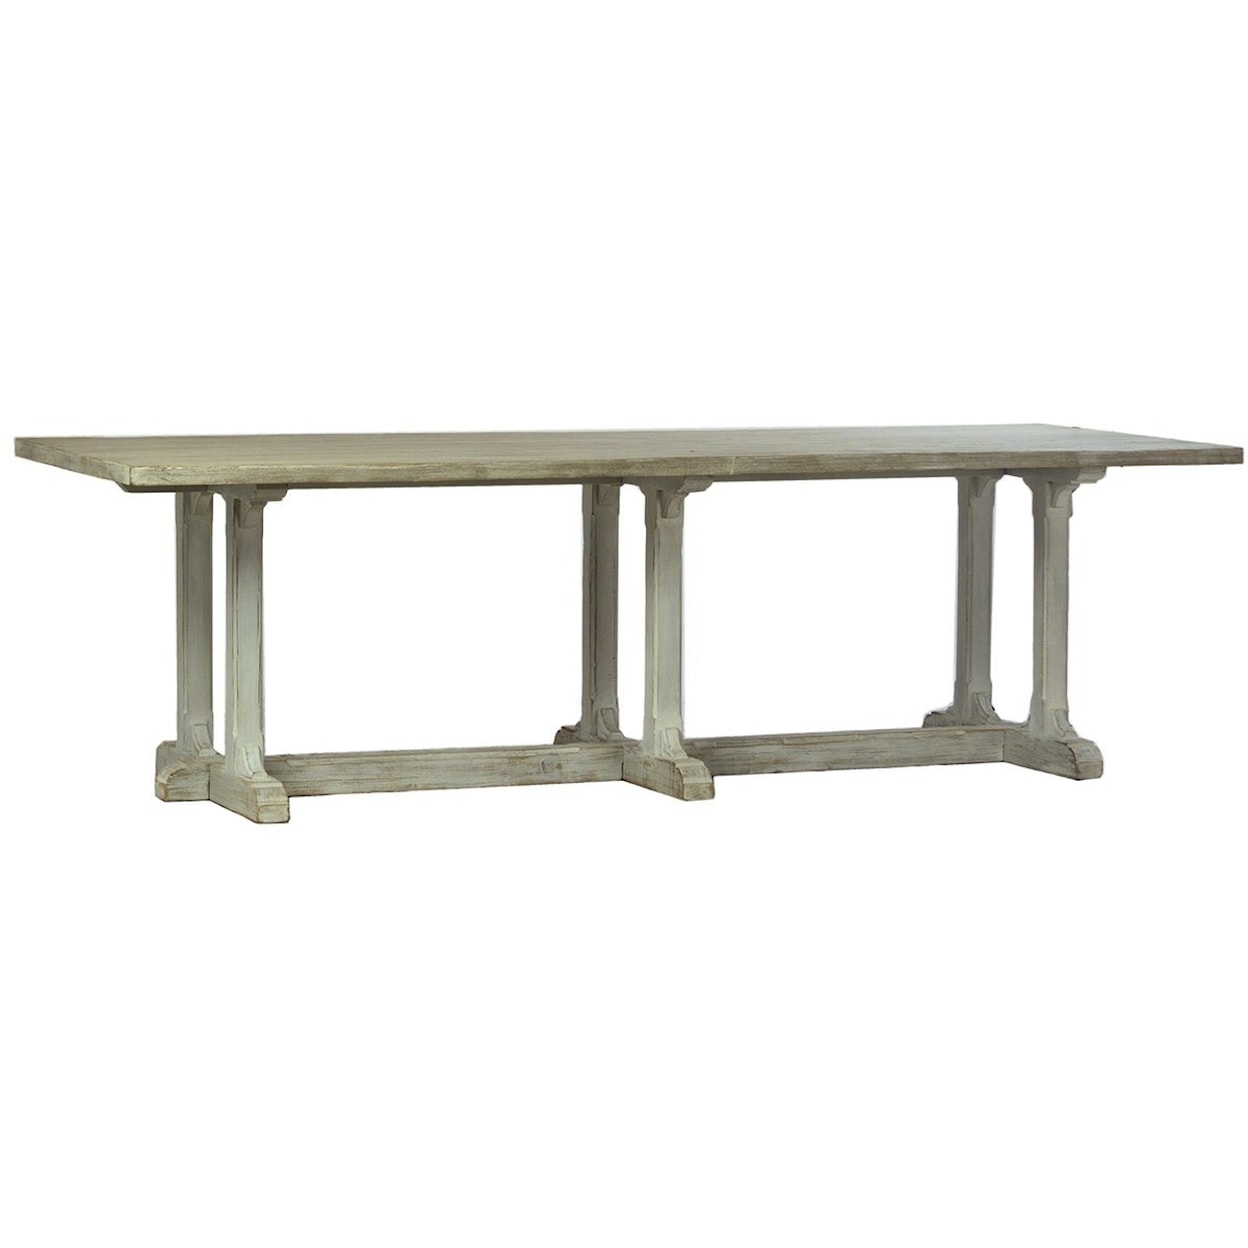 Dovetail Furniture Chambers Chambers Dining Table